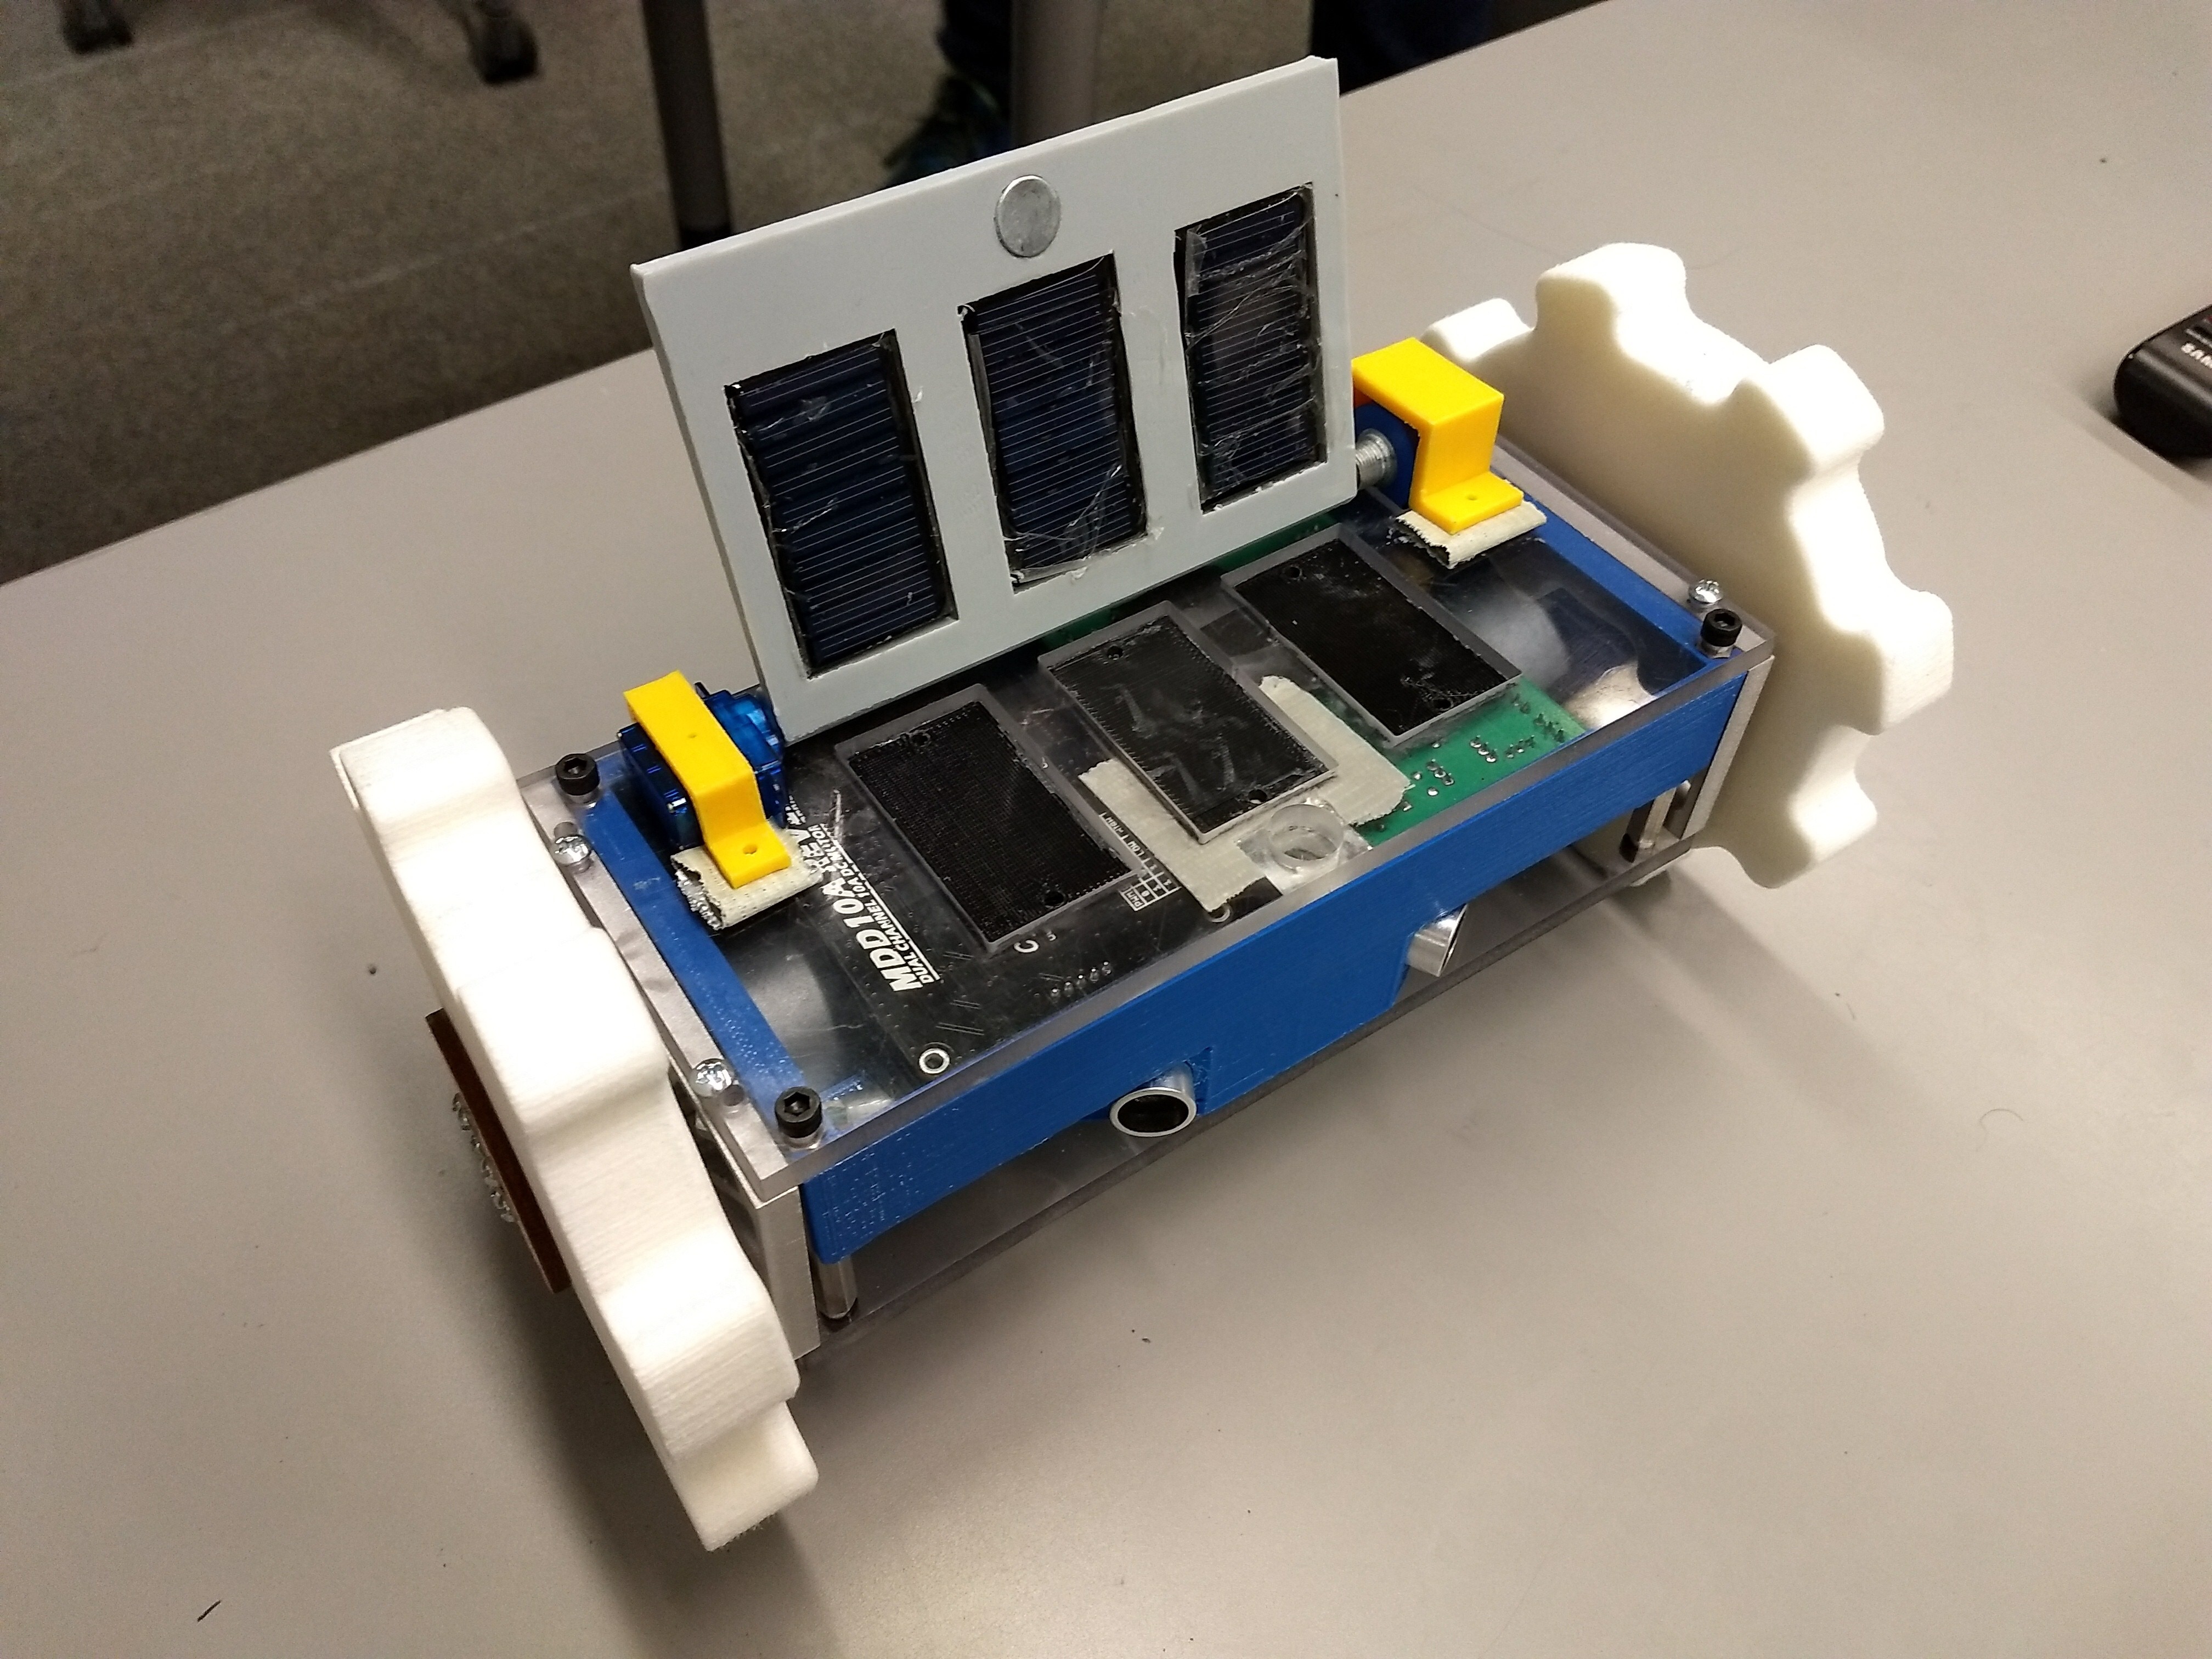 Autonomous rover for NASA Student Launch. Requirements were that it autonomously deployed on the ground after the rocket landed, drove 5 ft, and deployed a set of solar panels.